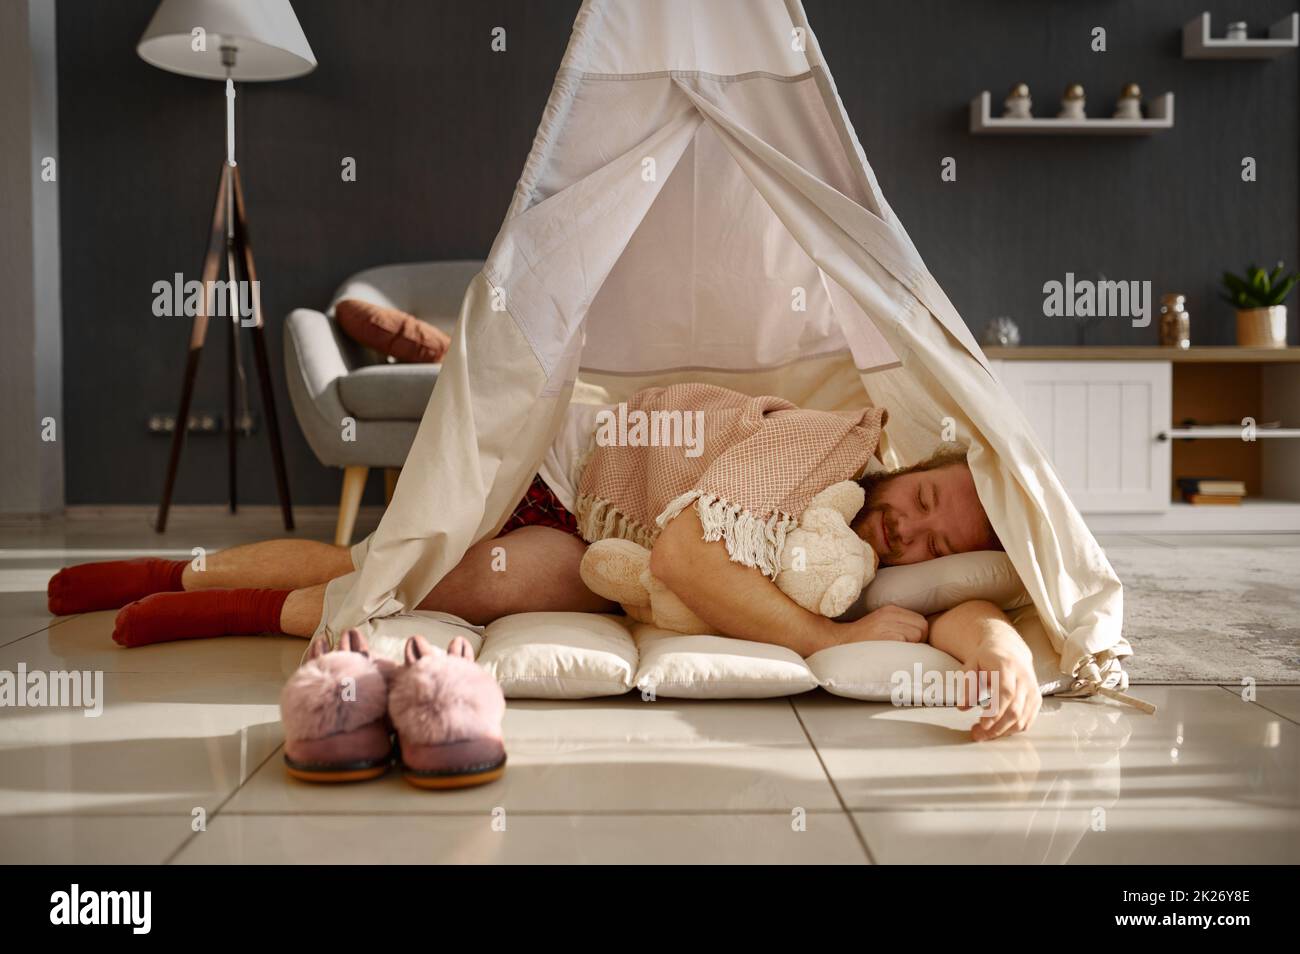 Businessman sleeping in teepee tent at home Stock Photo